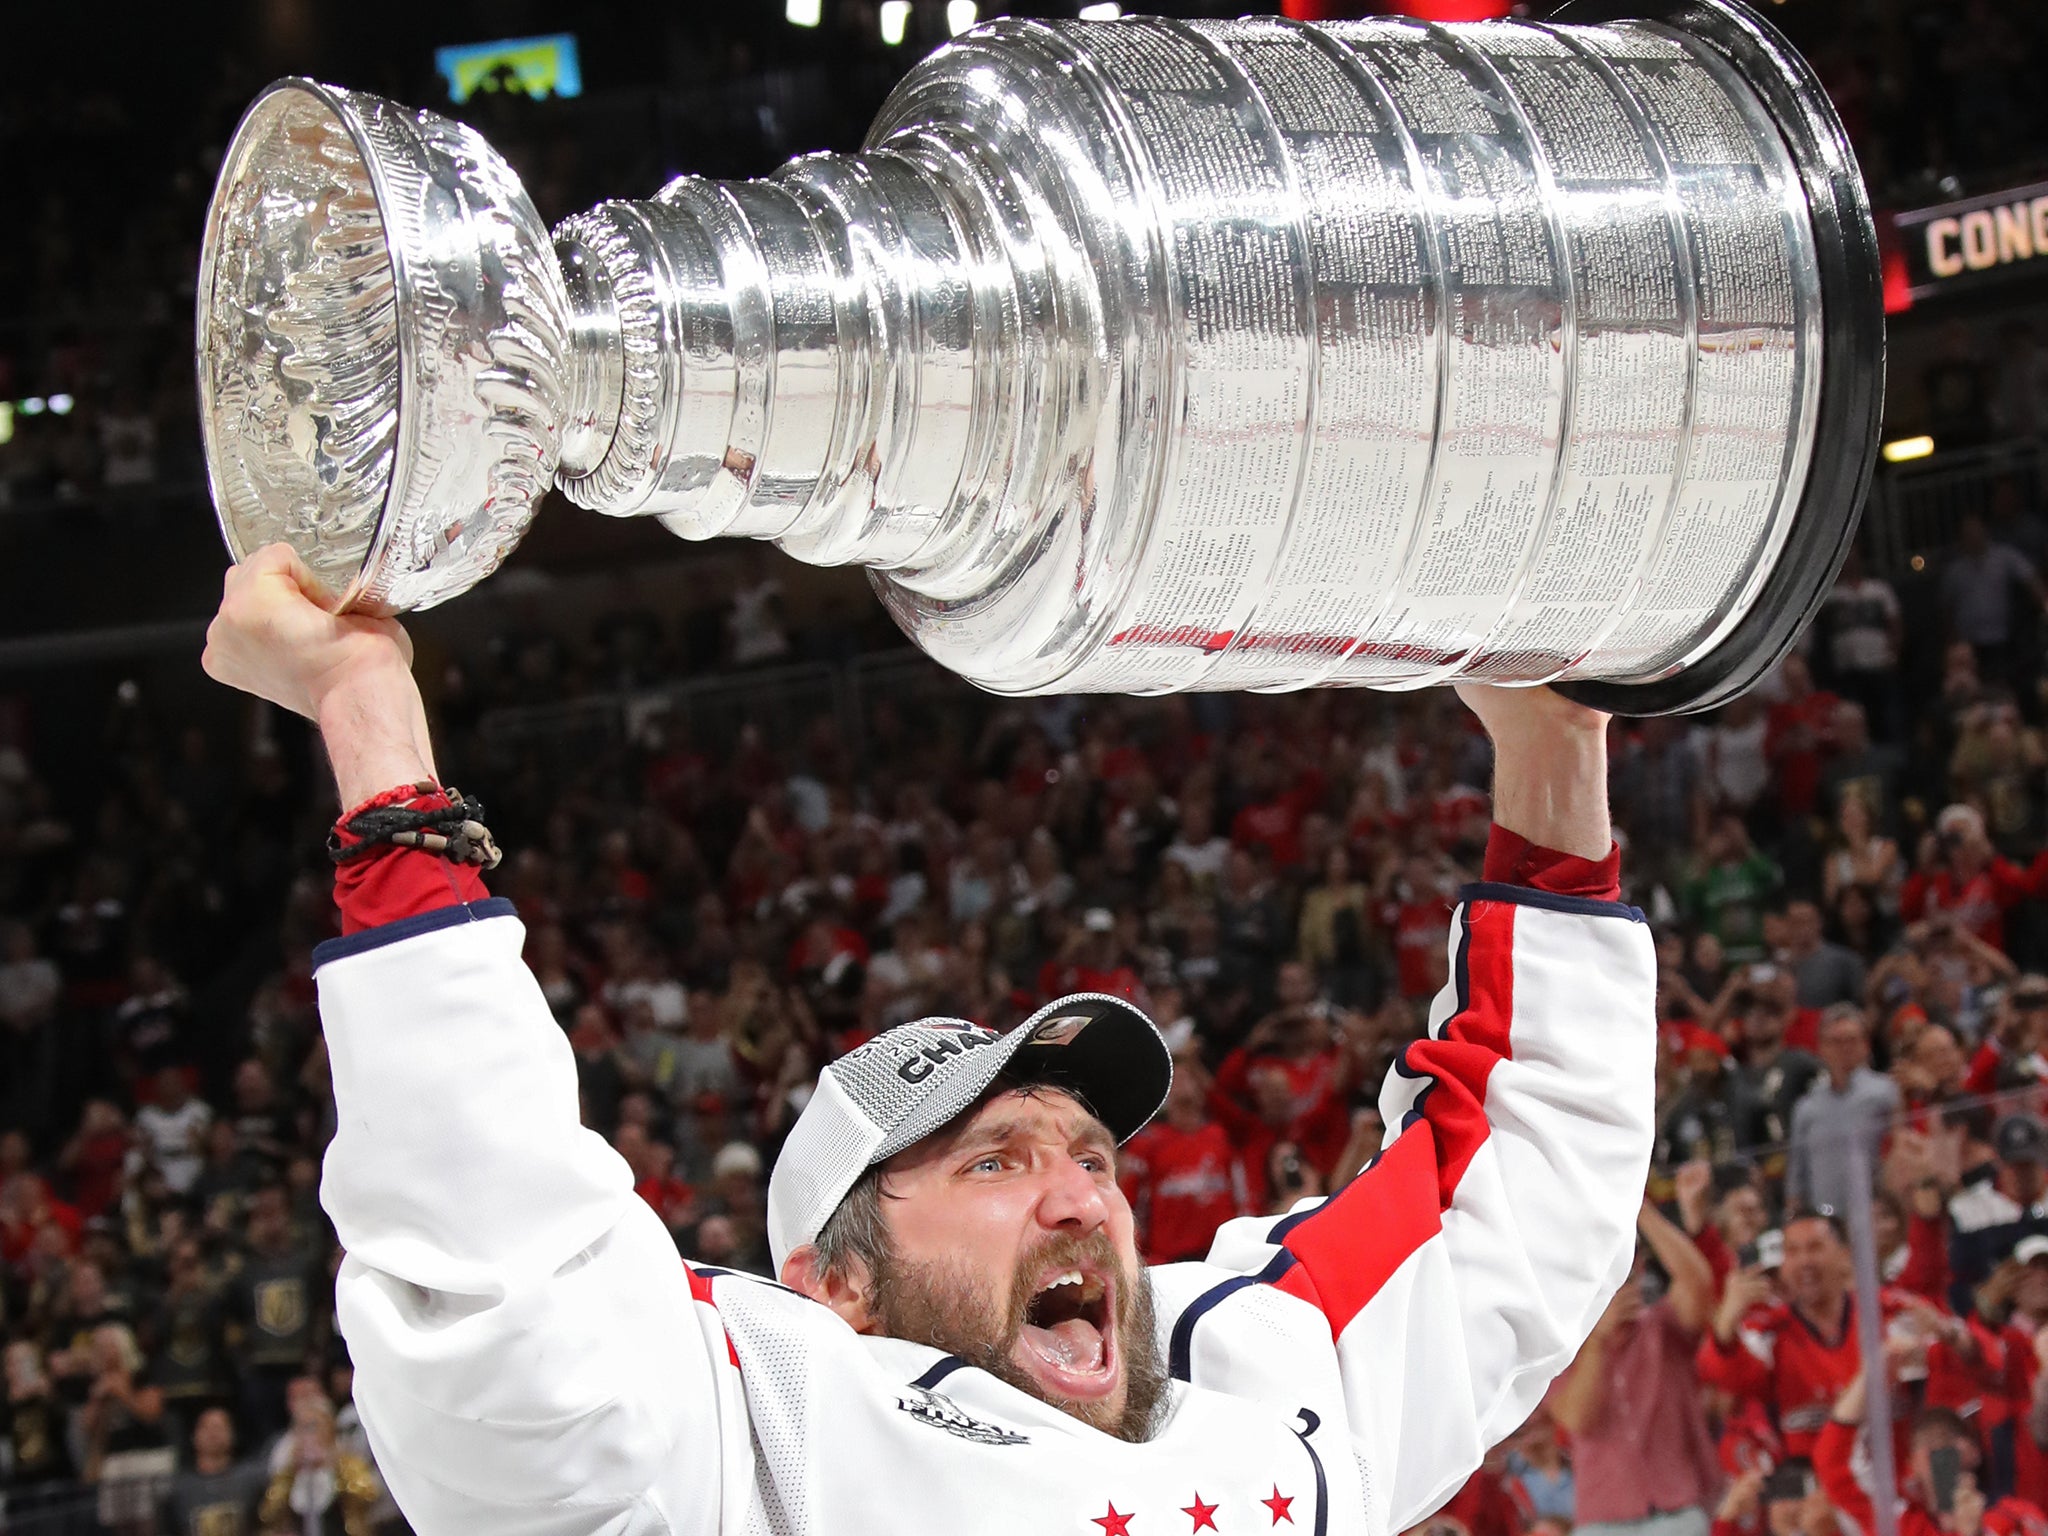 https://static.independent.co.uk/s3fs-public/thumbnails/image/2018/06/08/08/stanley-cup1.jpg